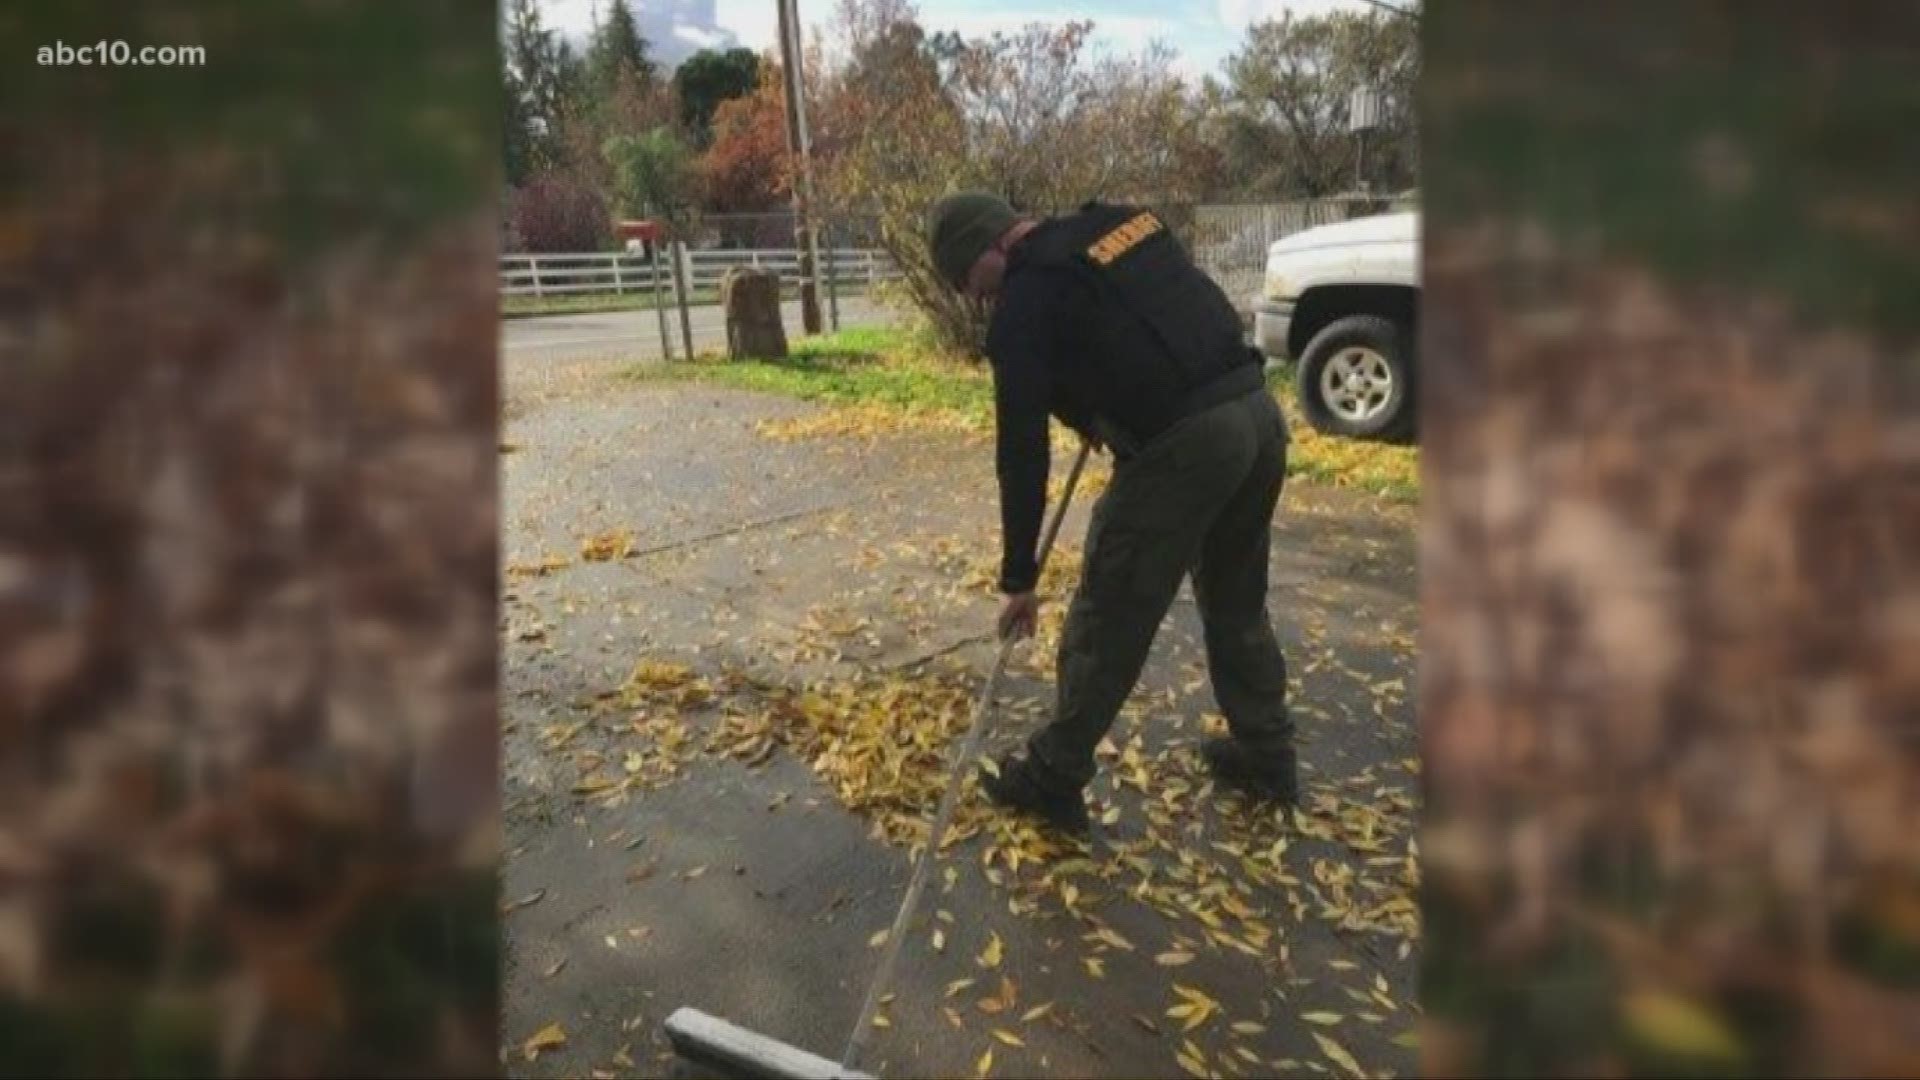 An arrest led an act of kindness, when Sacramento County Sheriff's Department Special Enforcement Detail (SWAT) realized the man they were taking, was helping an elderly veteran clean up his yard.